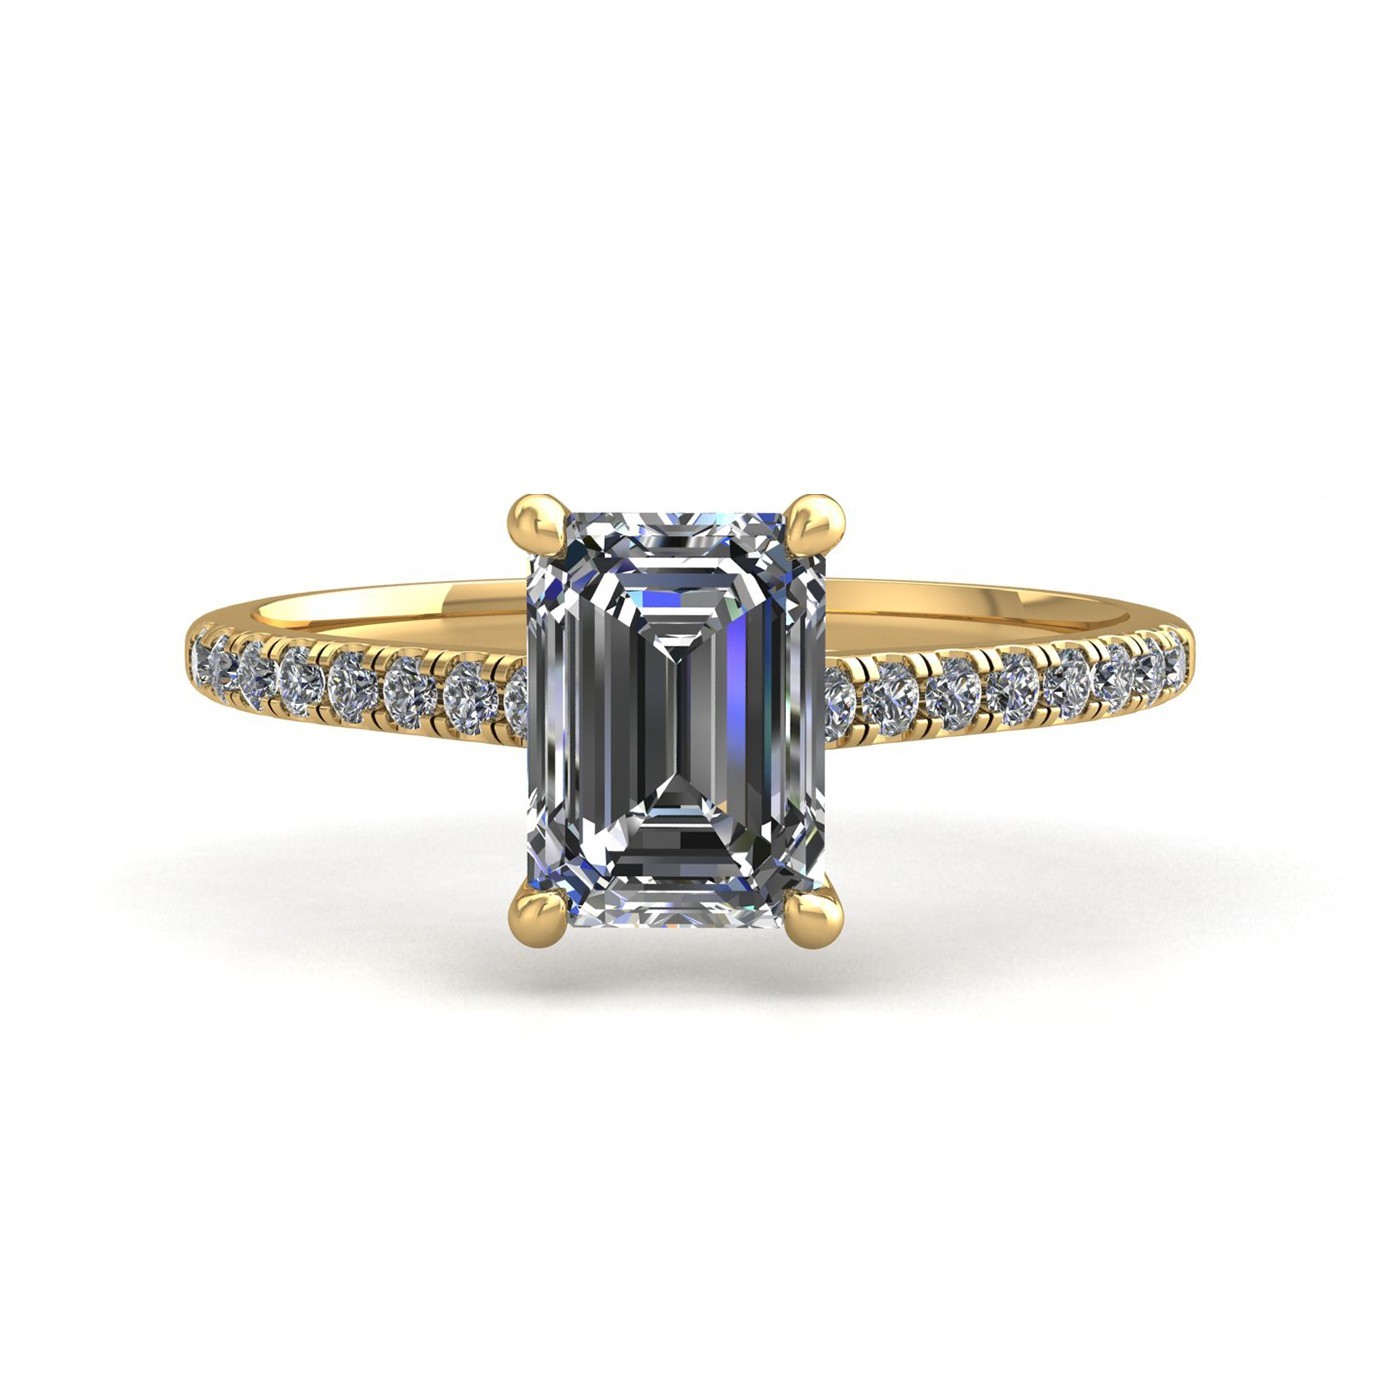 18k yellow gold 1.0ct 4 prongs emerald cut diamond engagement ring with whisper thin pavÉ set band Photos & images